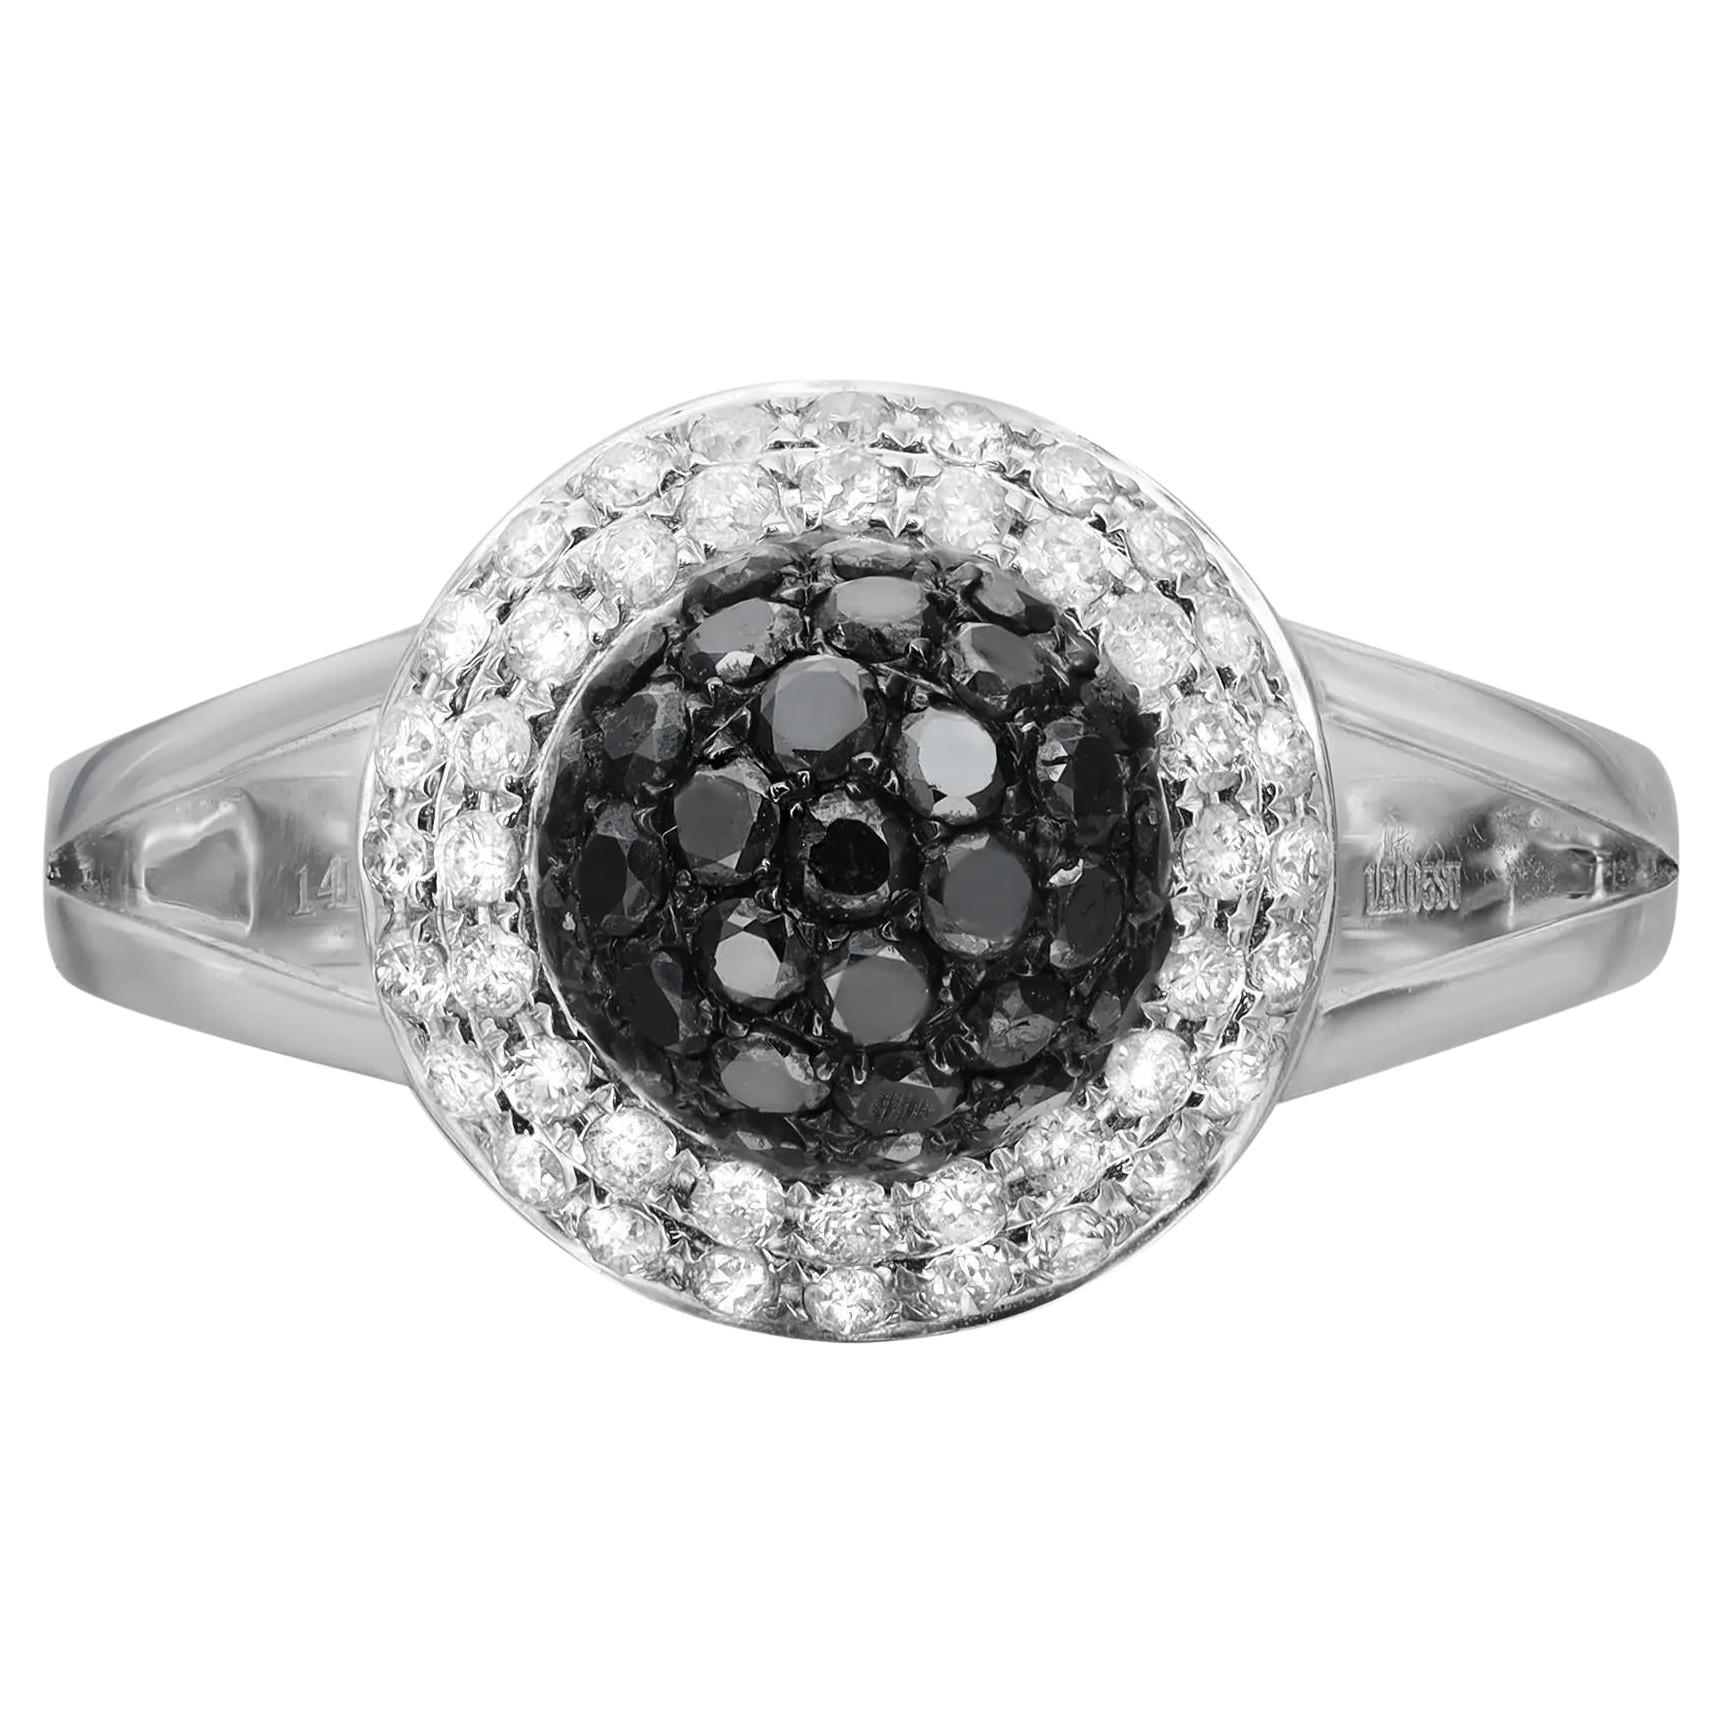 1.25cttw White and Black Round Cut Diamond Cocktail Ring 14k White Gold